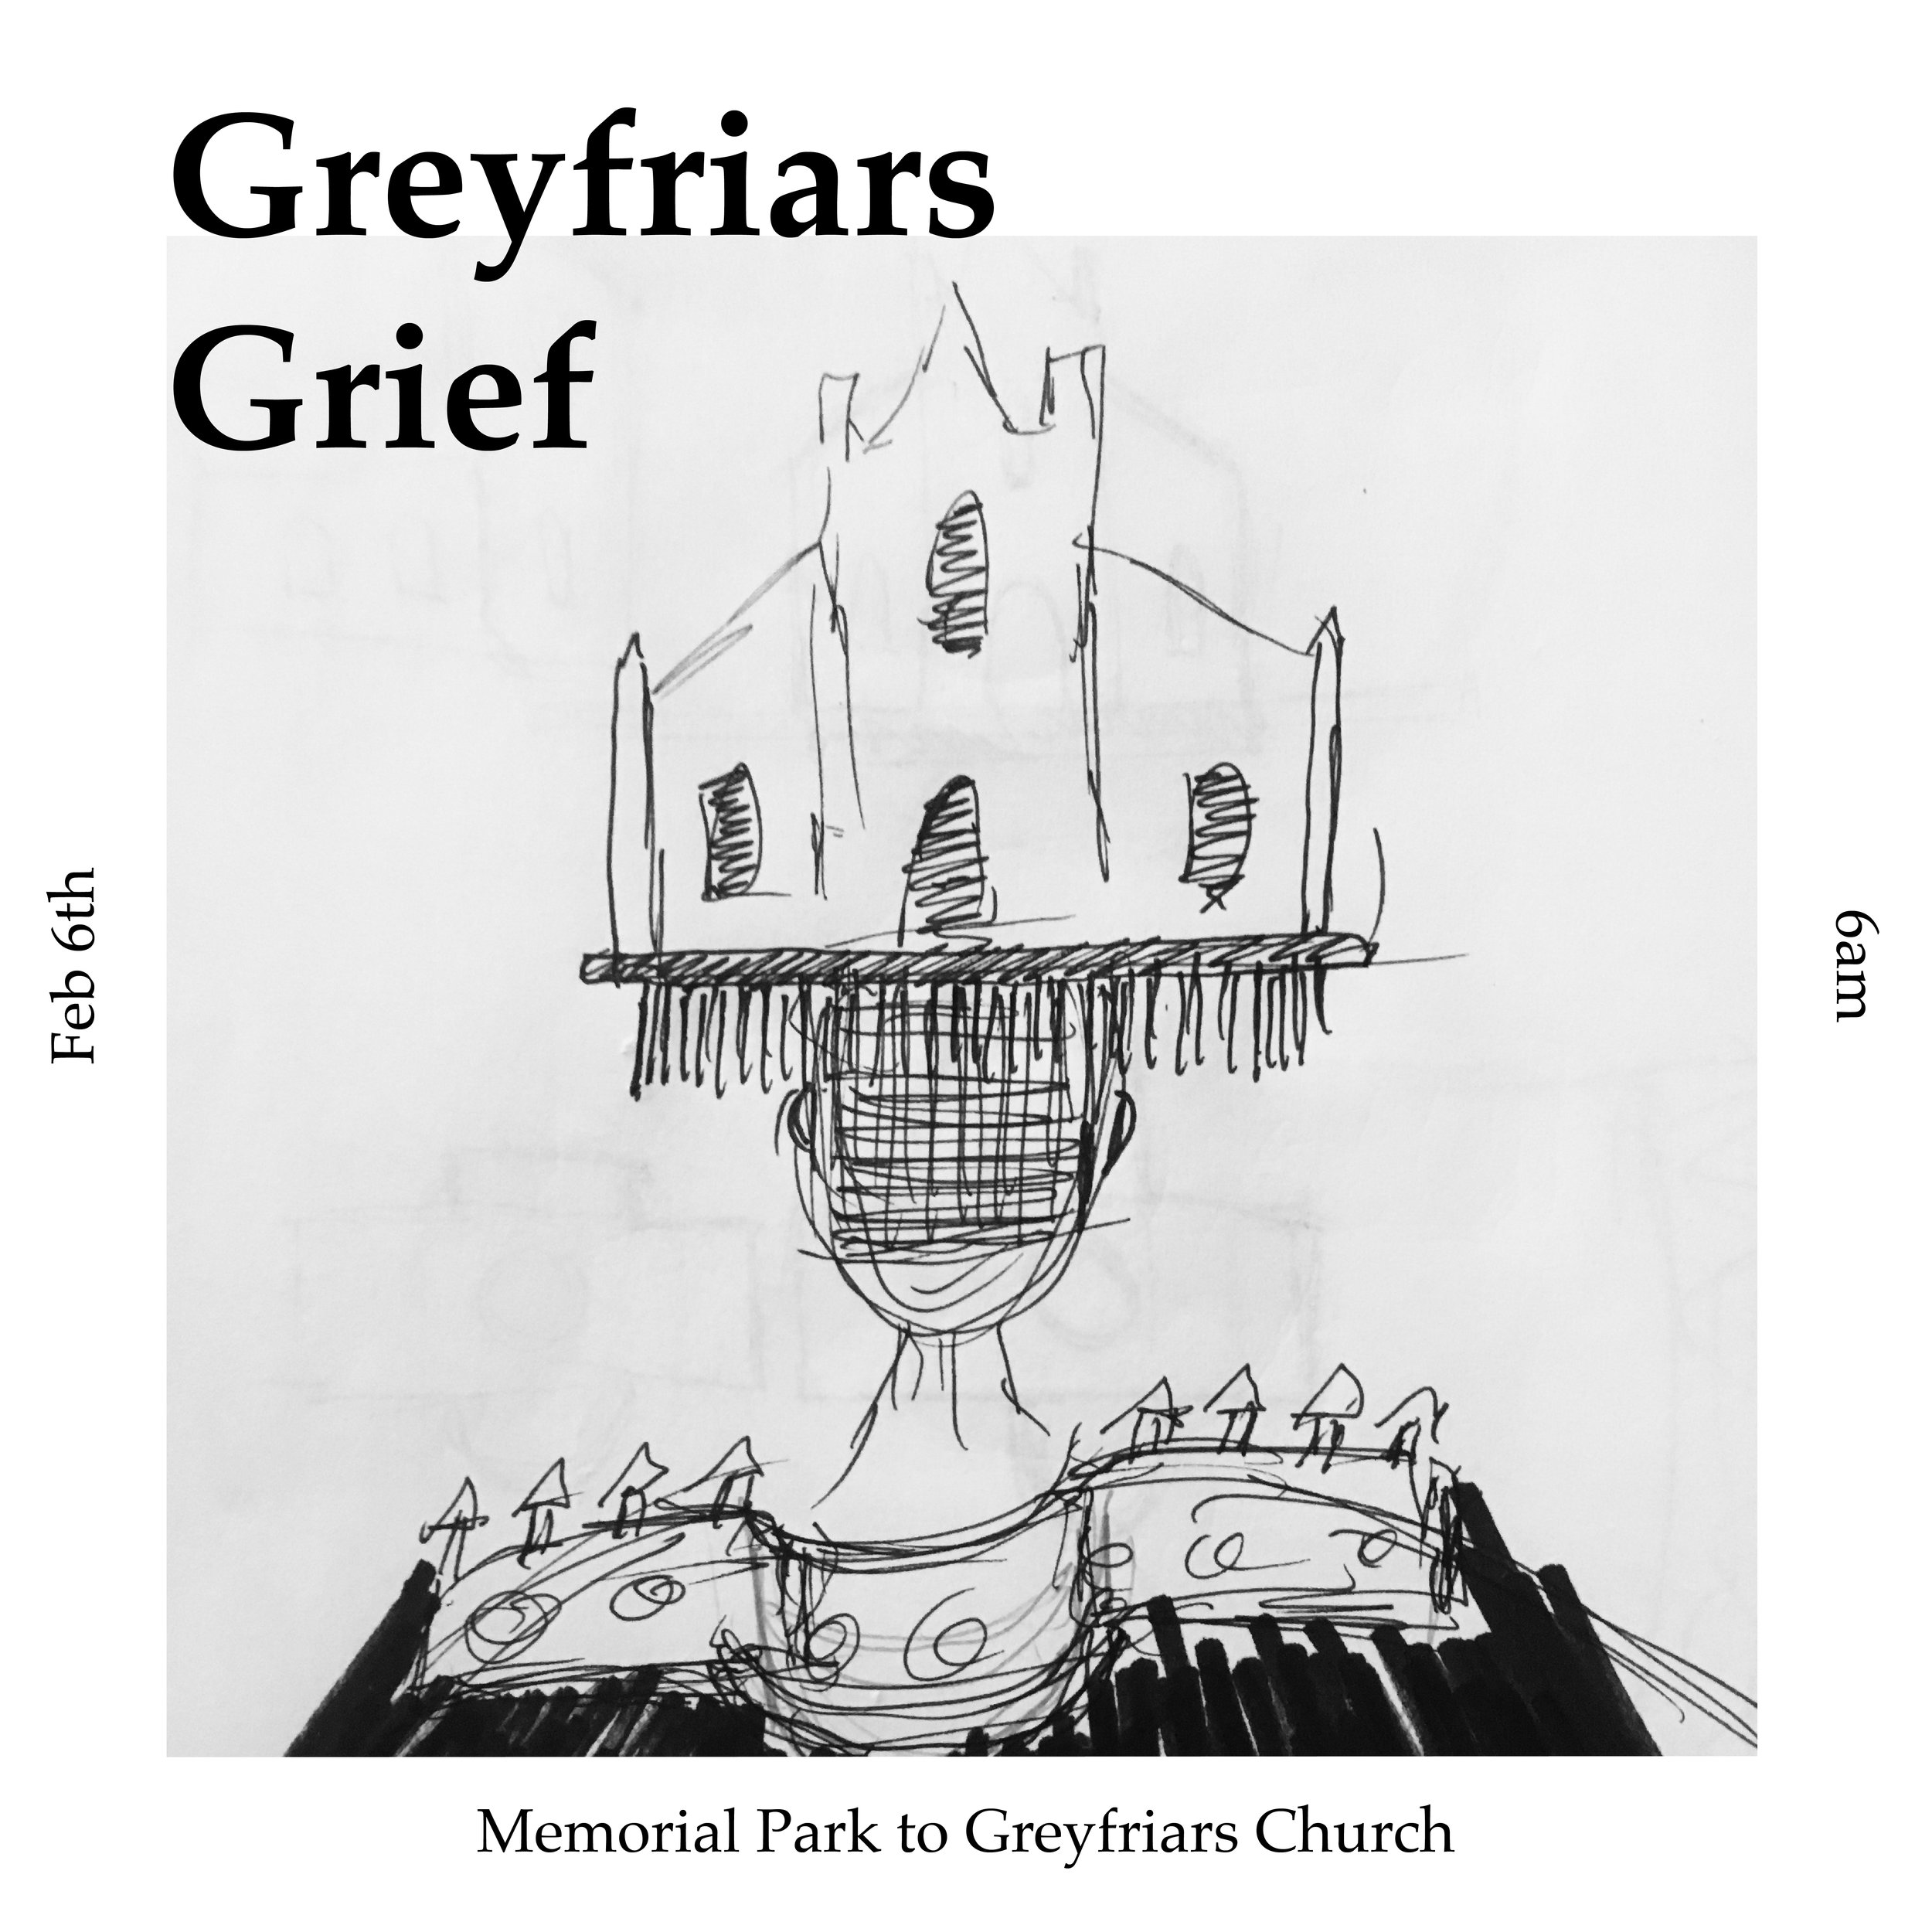 Invitation for Greyfriars Grief 